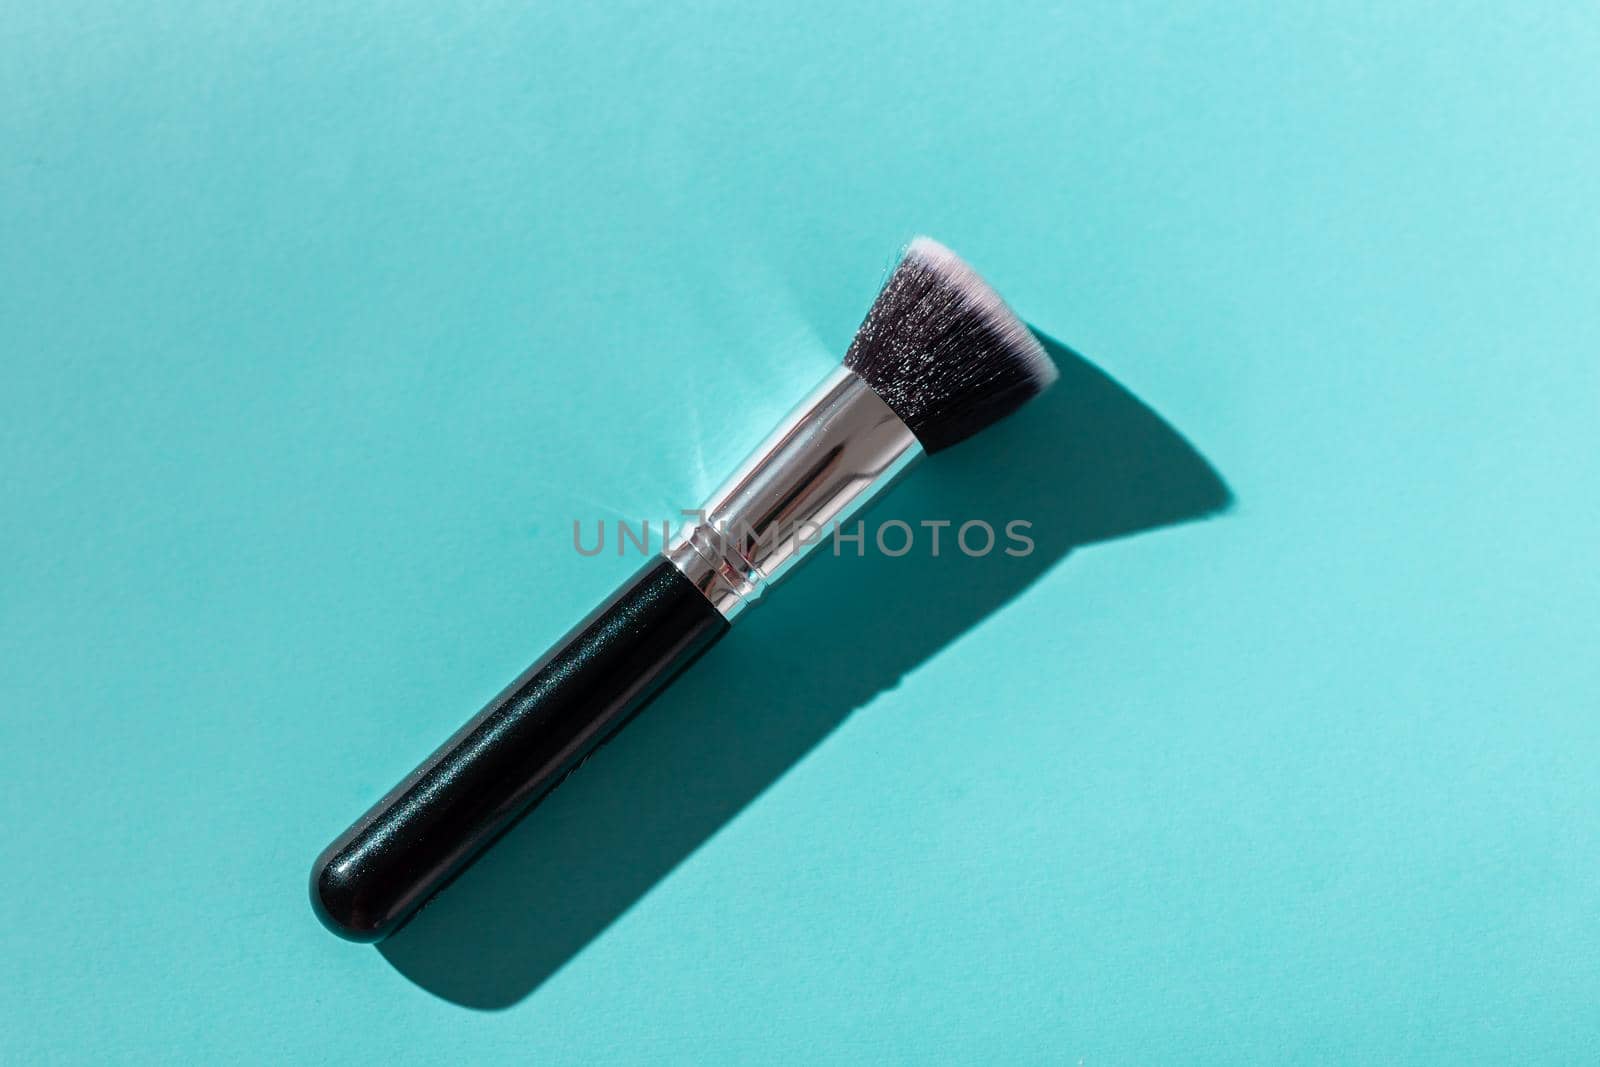 Make up brush on turquoise background, top view